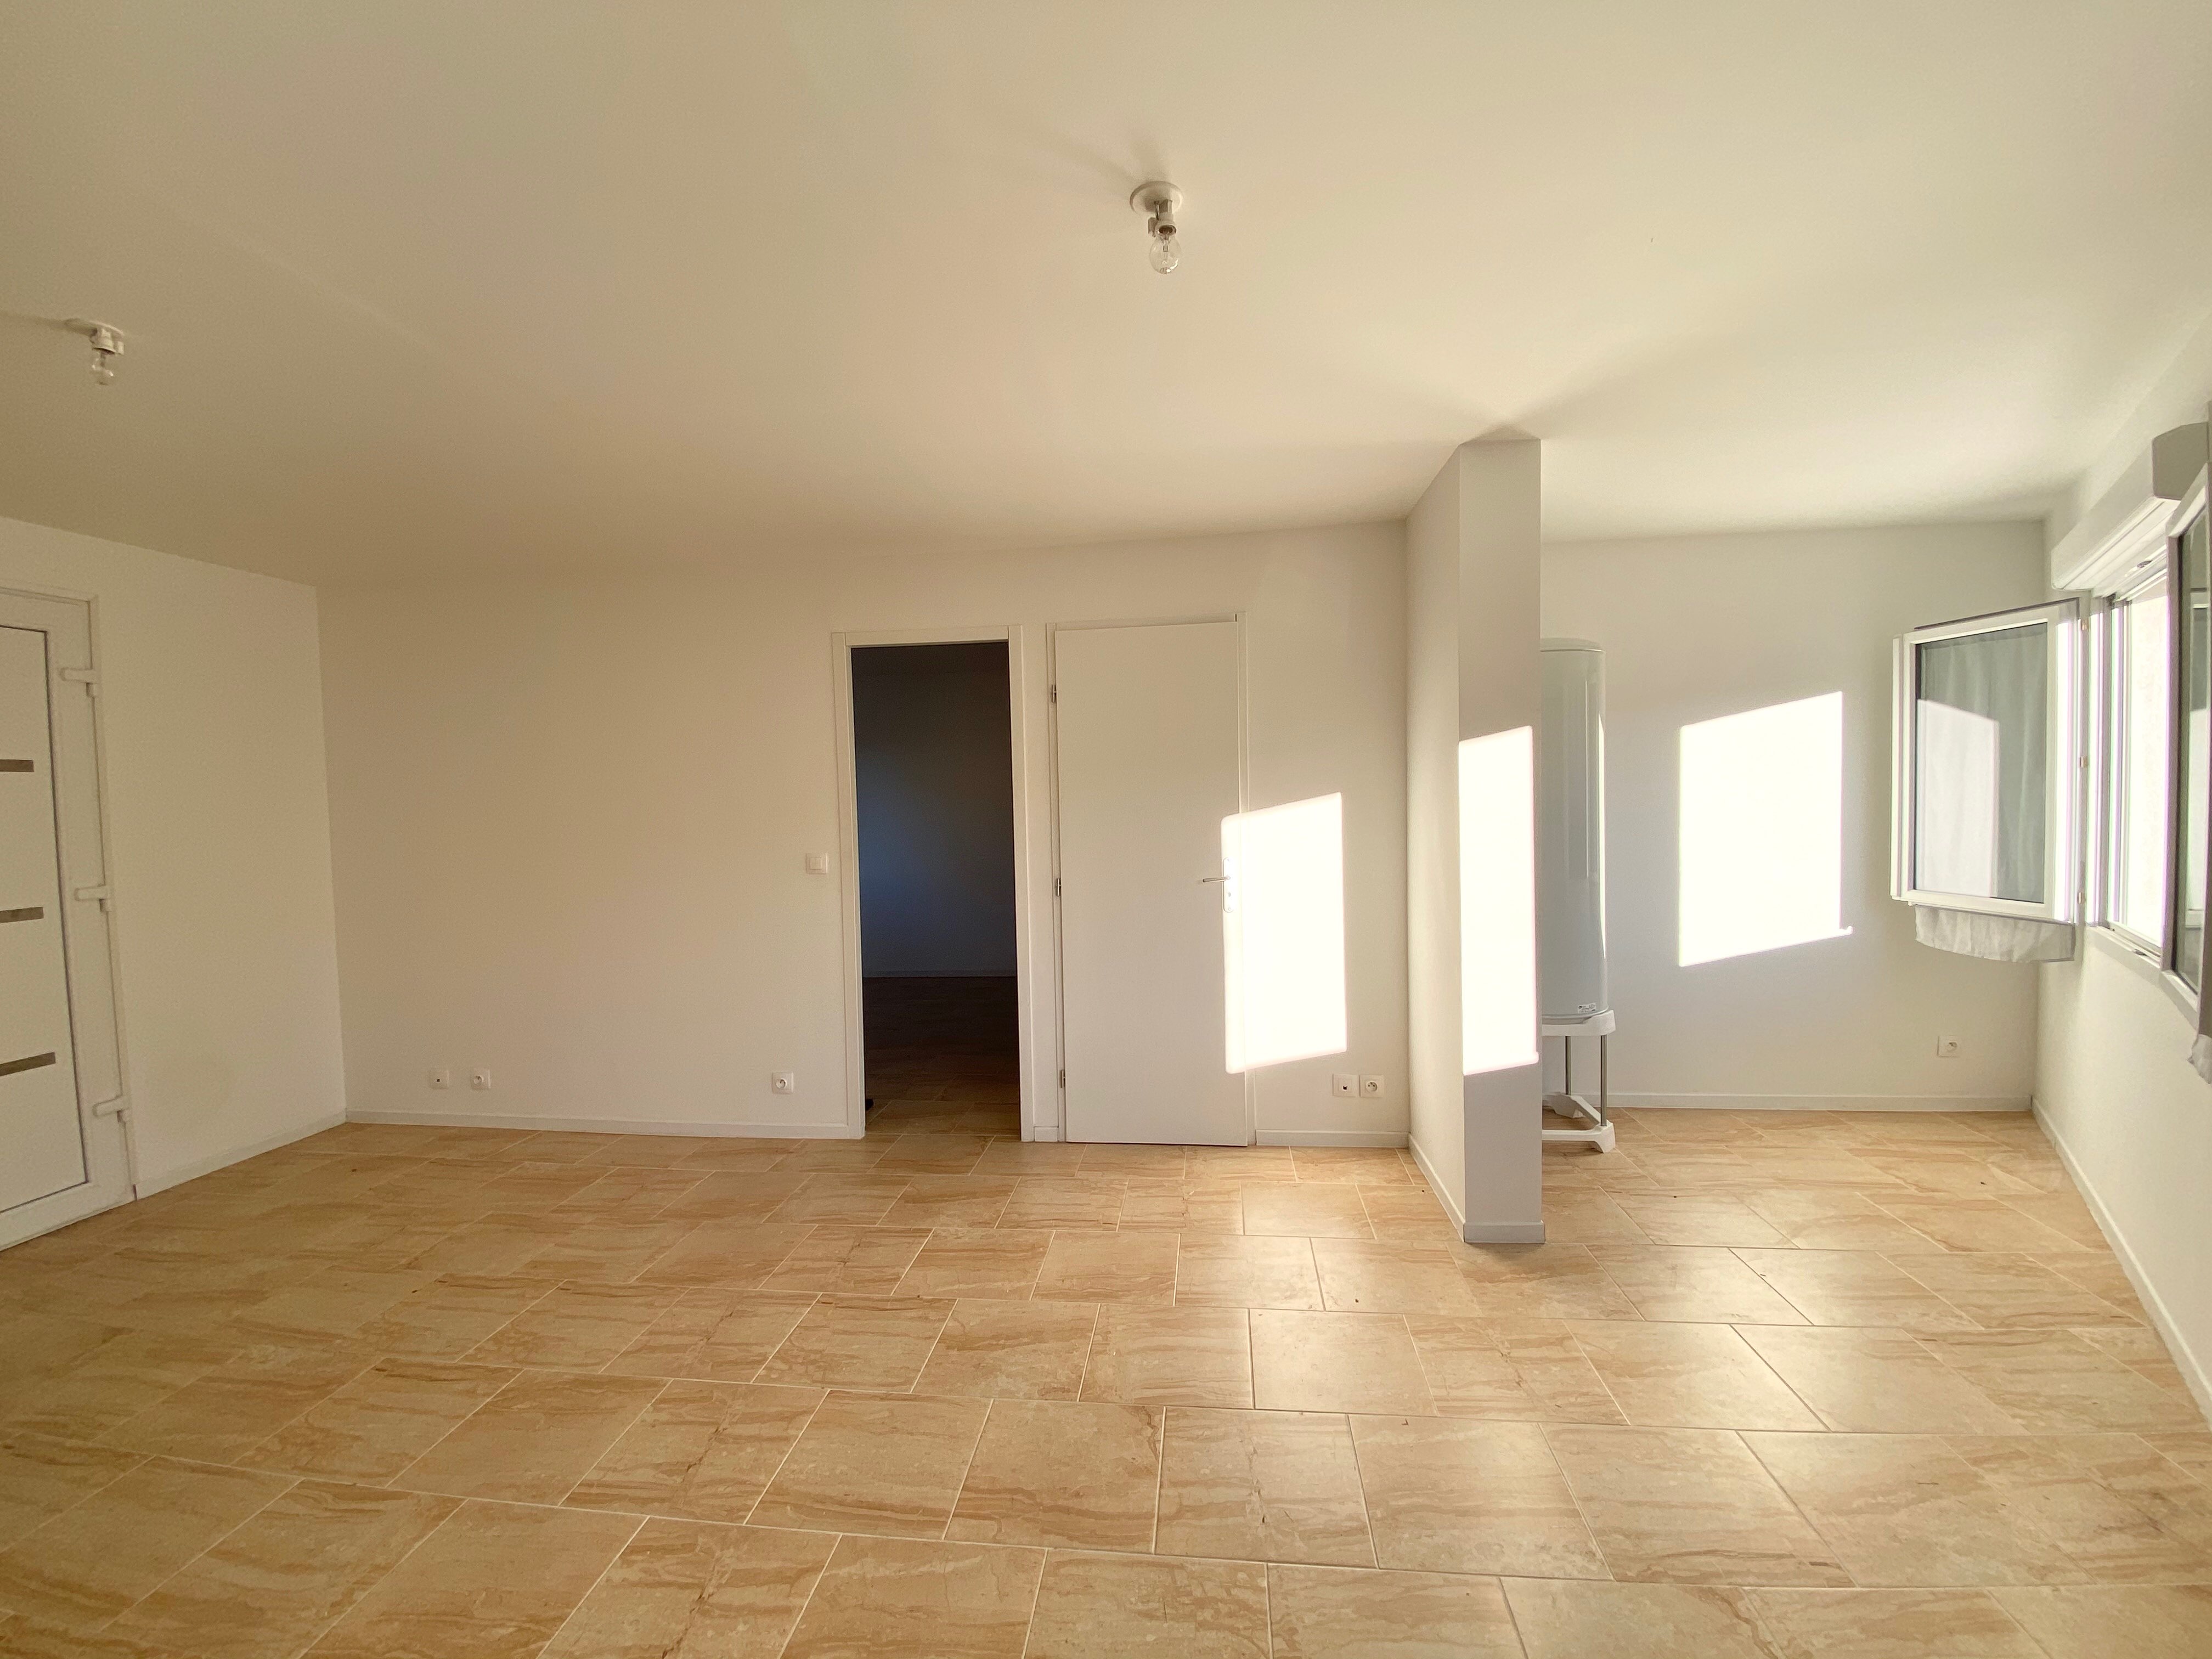  location  Appartement  T2 40m2